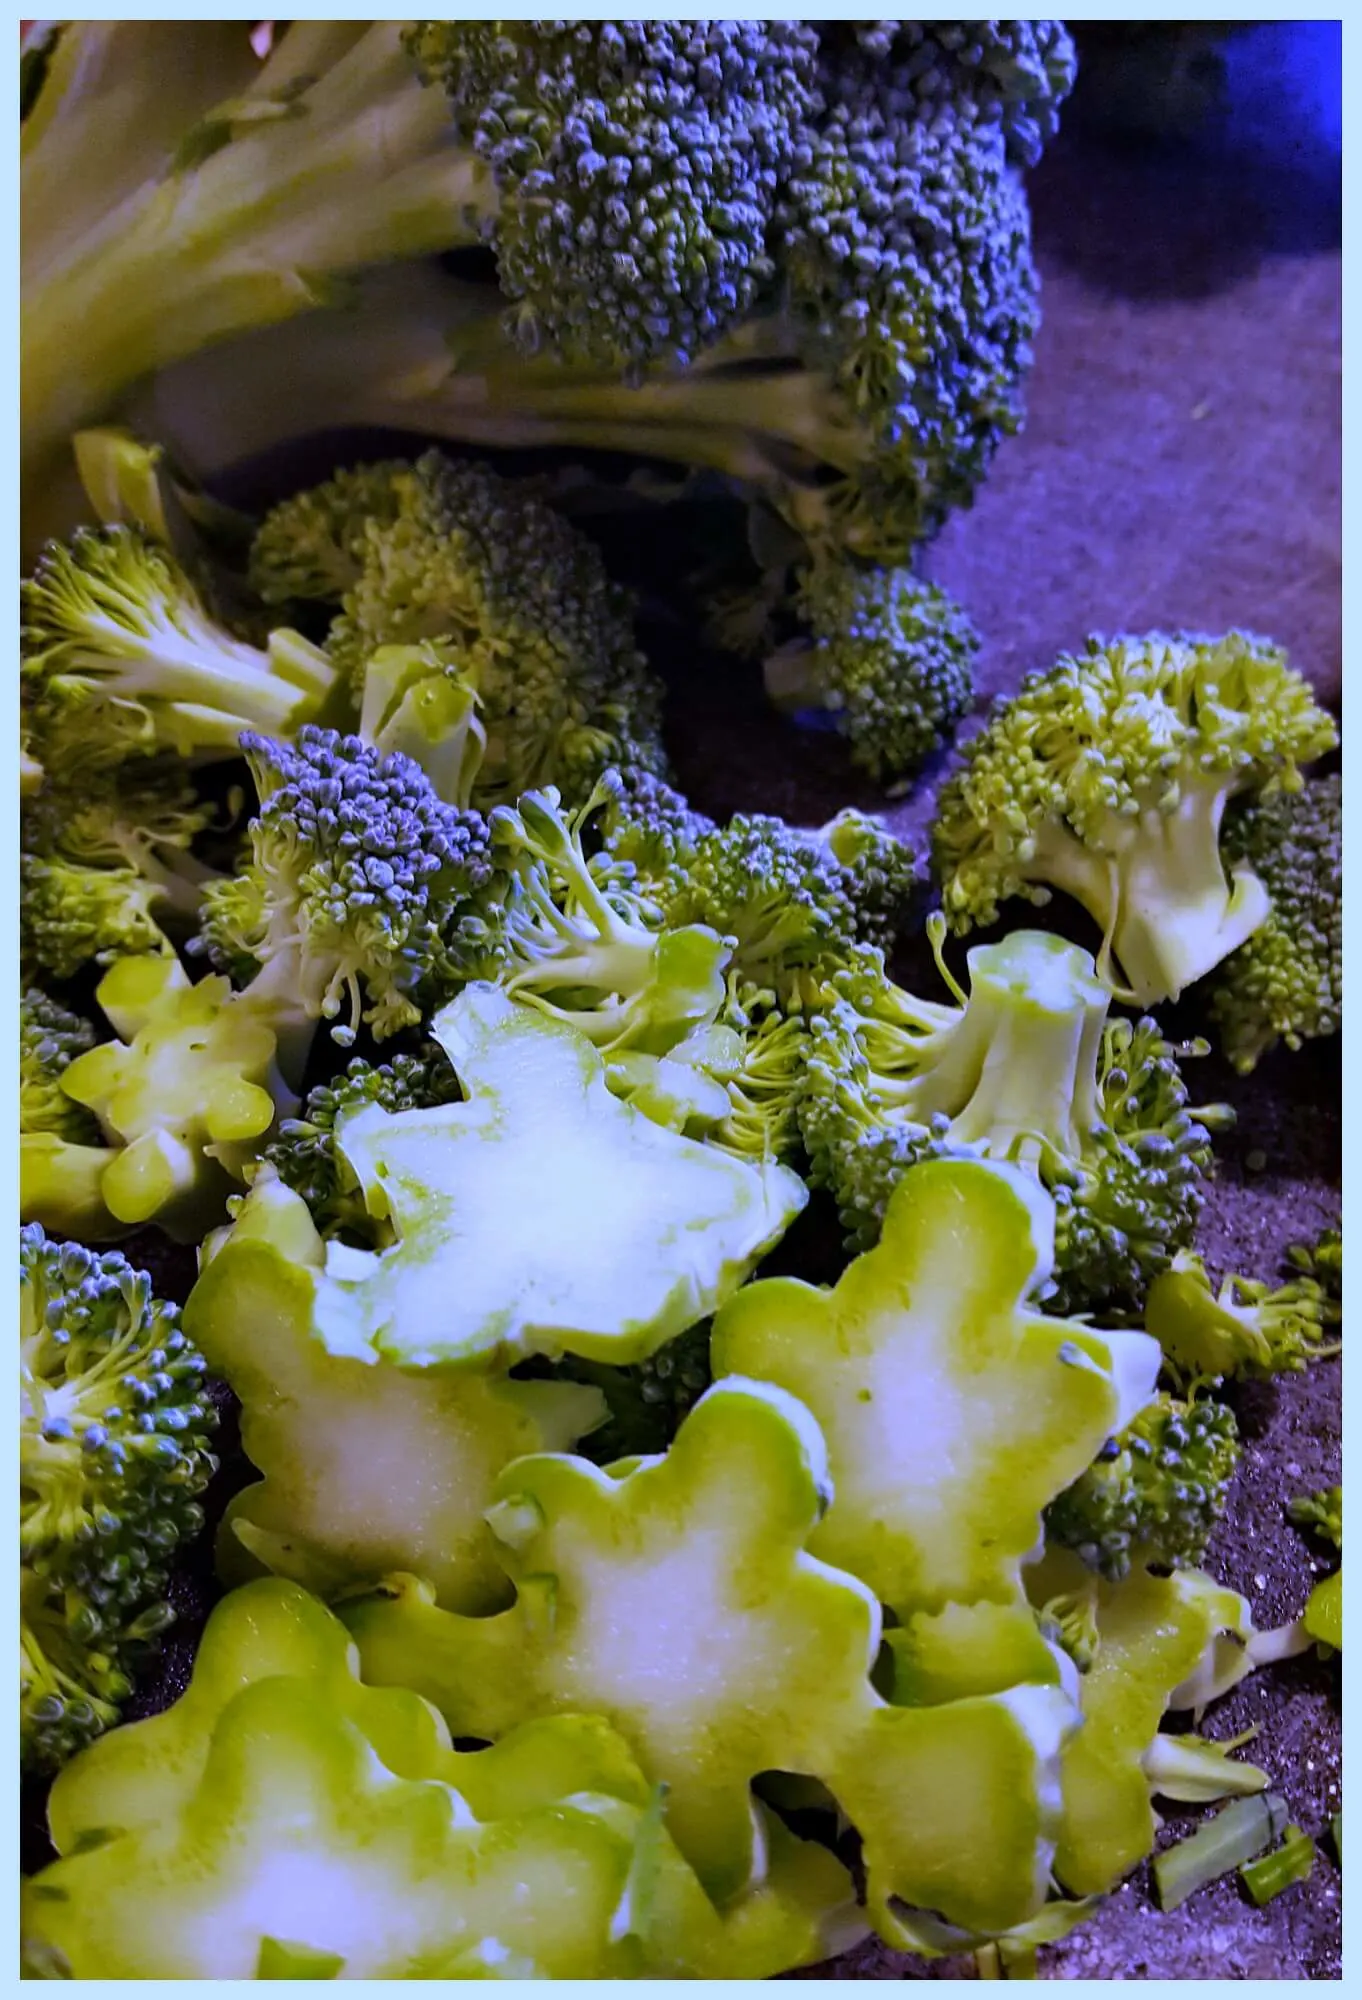 How to cut up fresh broccoli before cooking